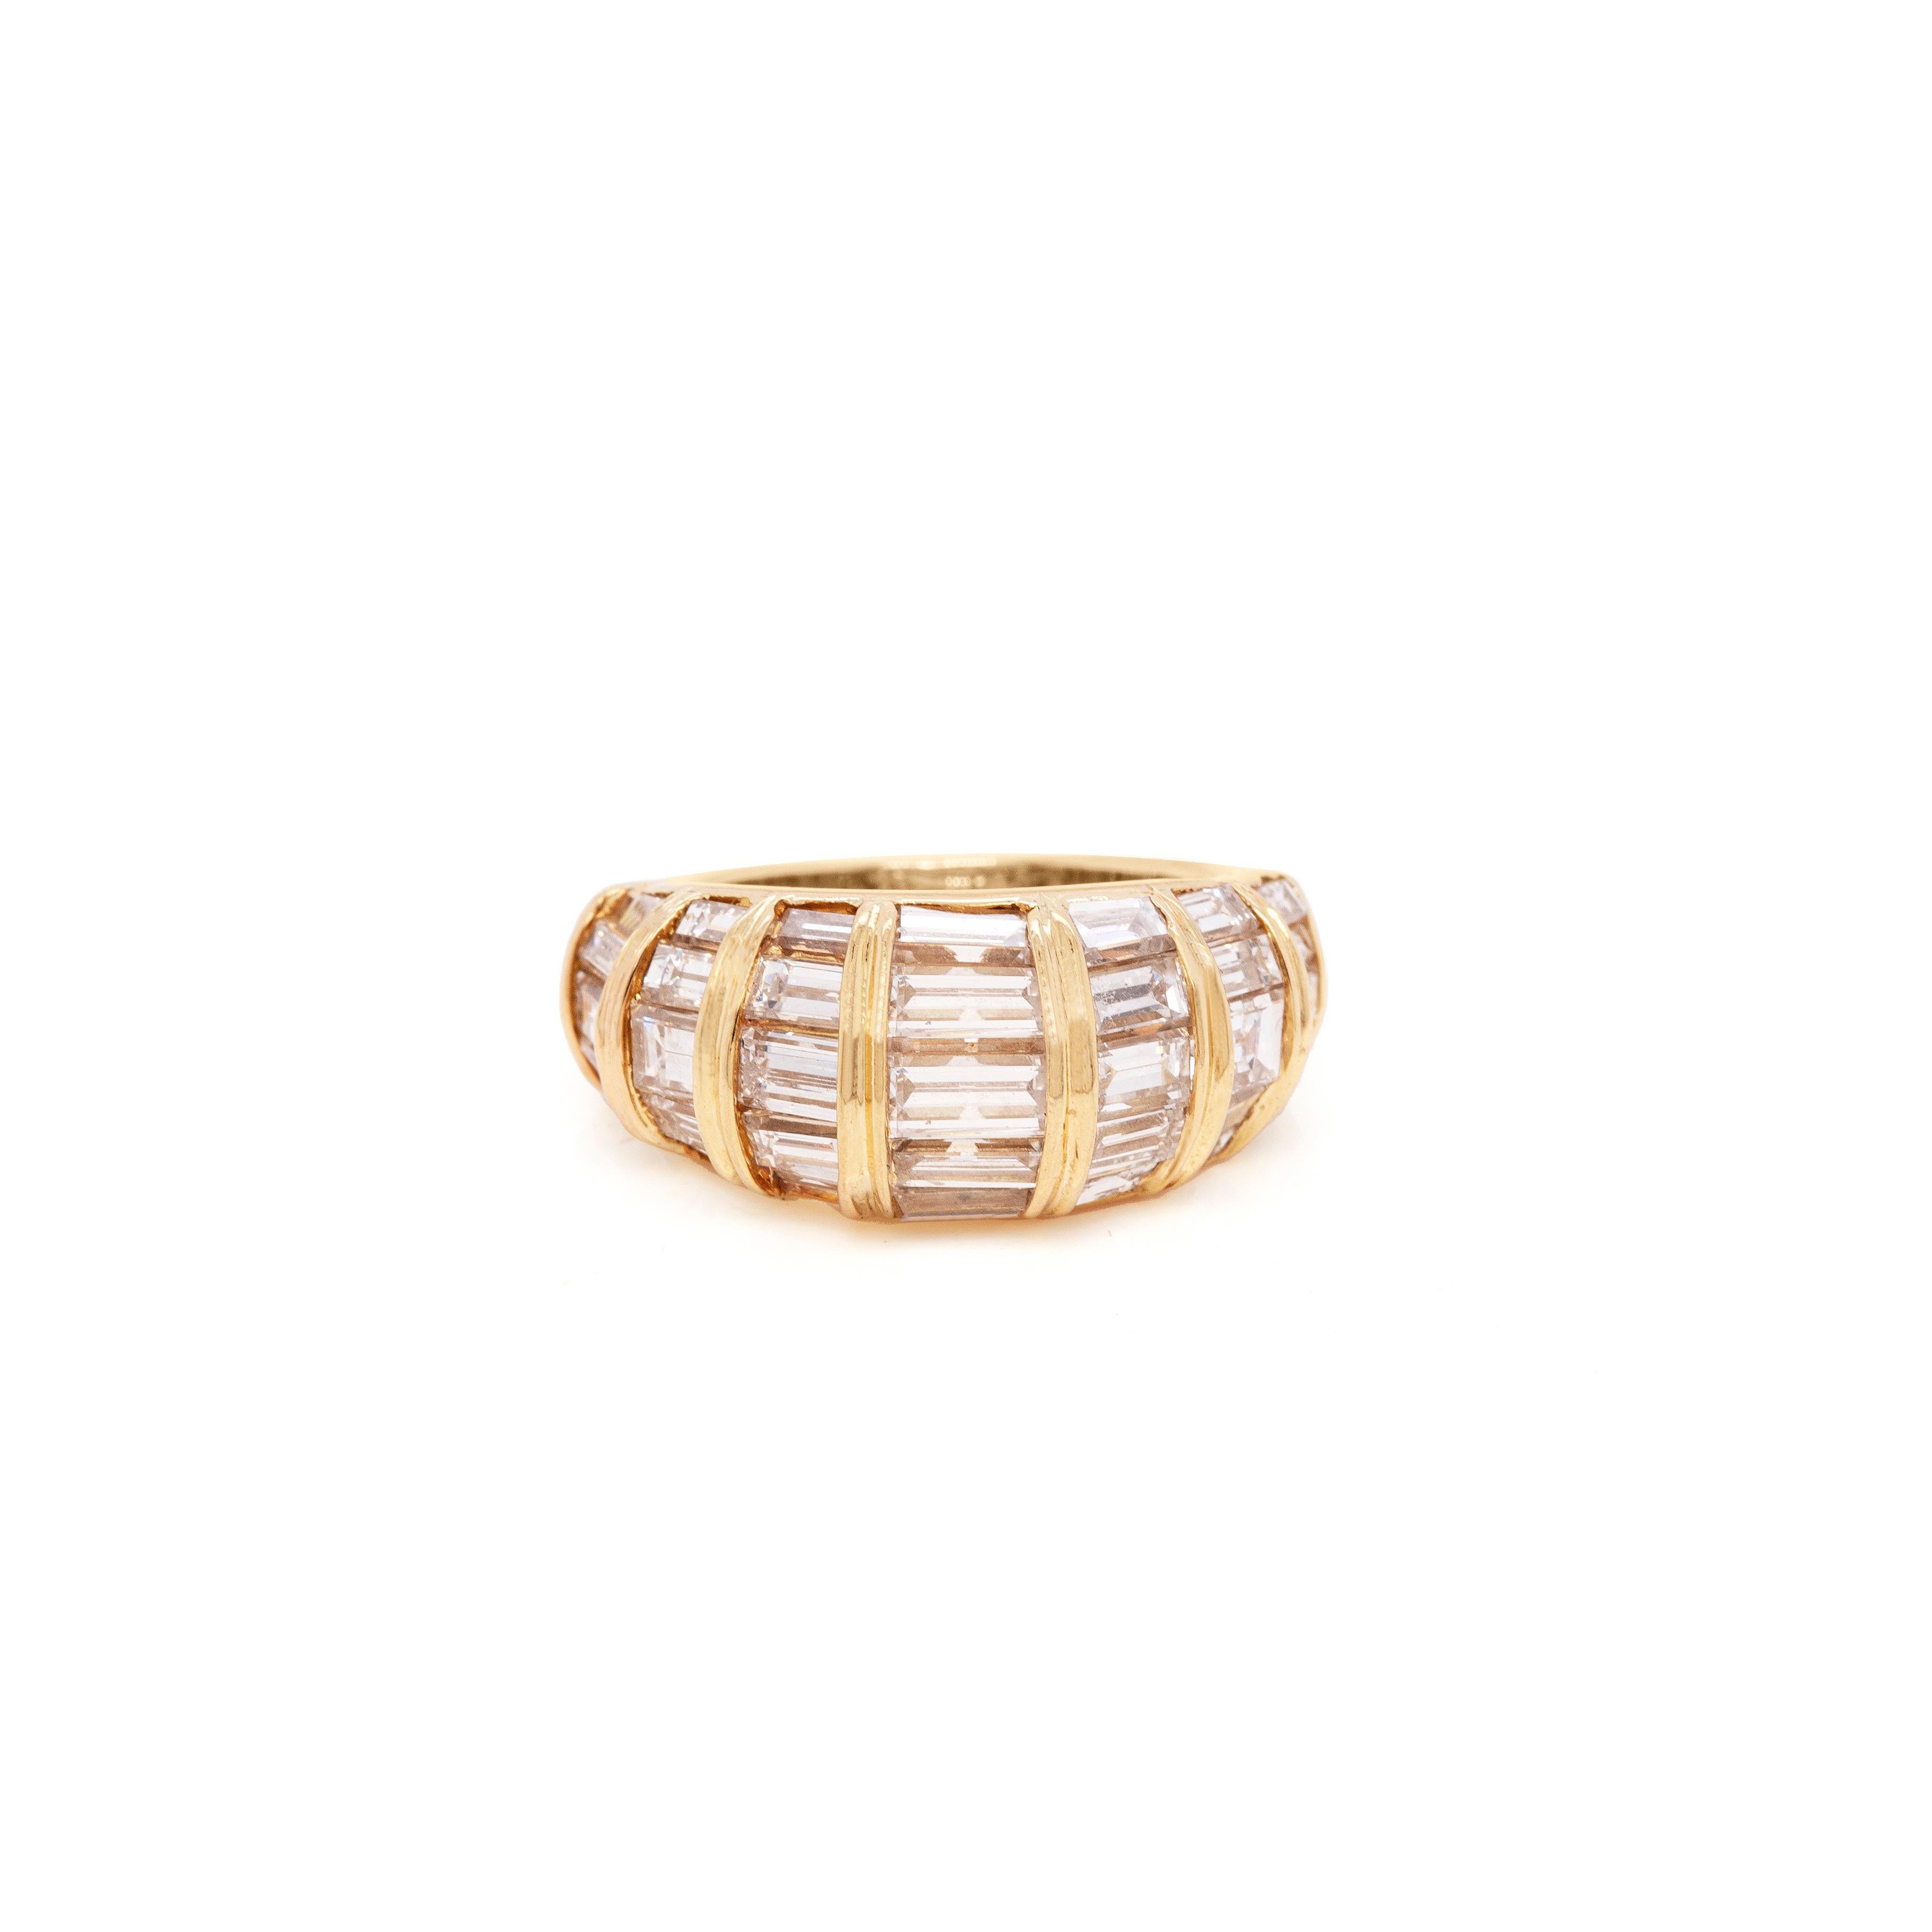 This gorgeous 18 carat yellow gold bombé cluster ring is crafted with seven rows of channel set baguette cut diamonds each, boasting a remarkable approximate total weight of 5.00 carats, all constructed into a fluid domed design. The ring tapers